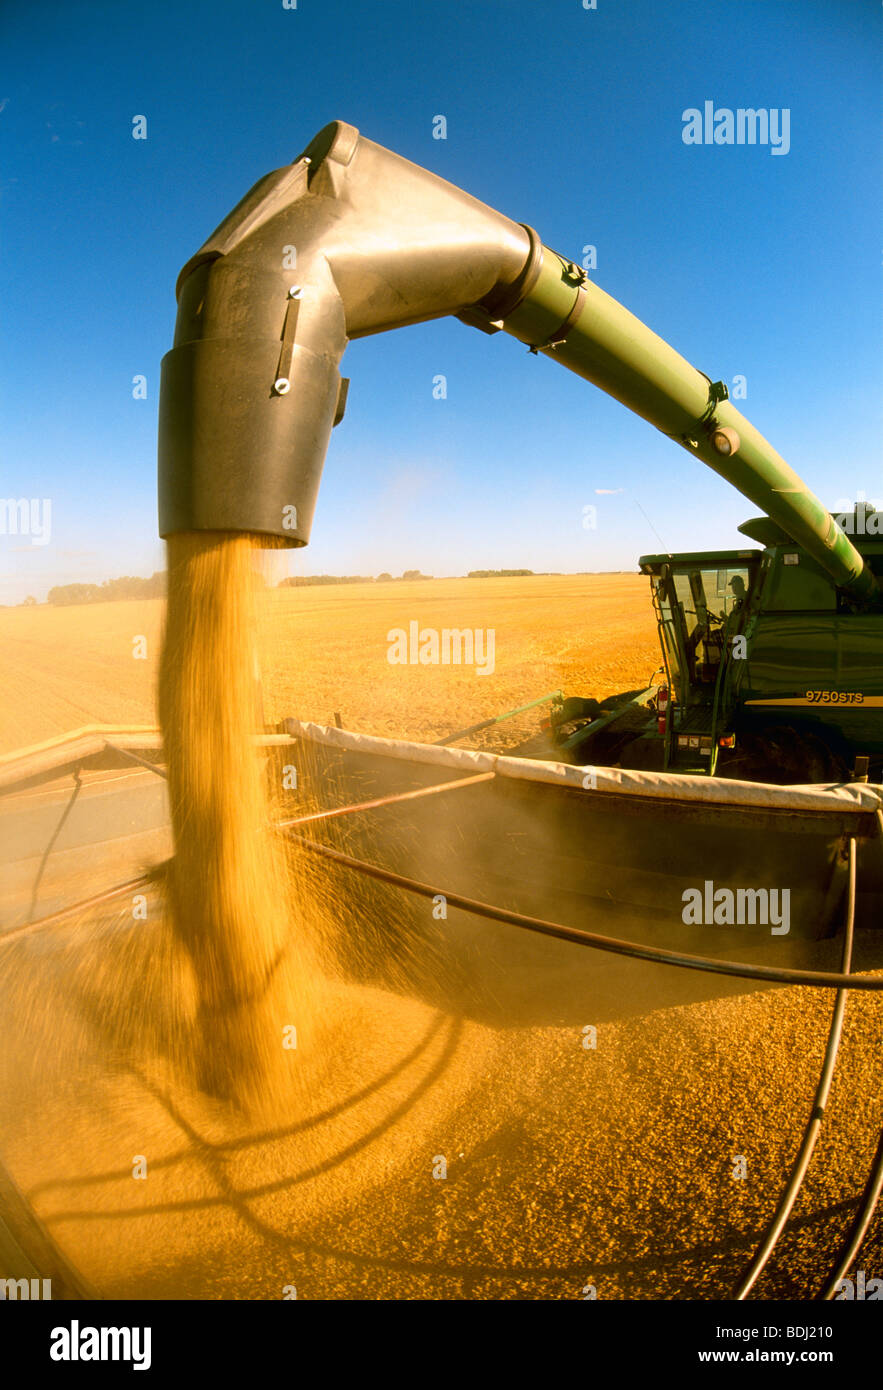 Agriculture - A combine unloads harvested barley into a grain truck for transport to a grain elevator / Dugald, Manitoba, Canada Stock Photo